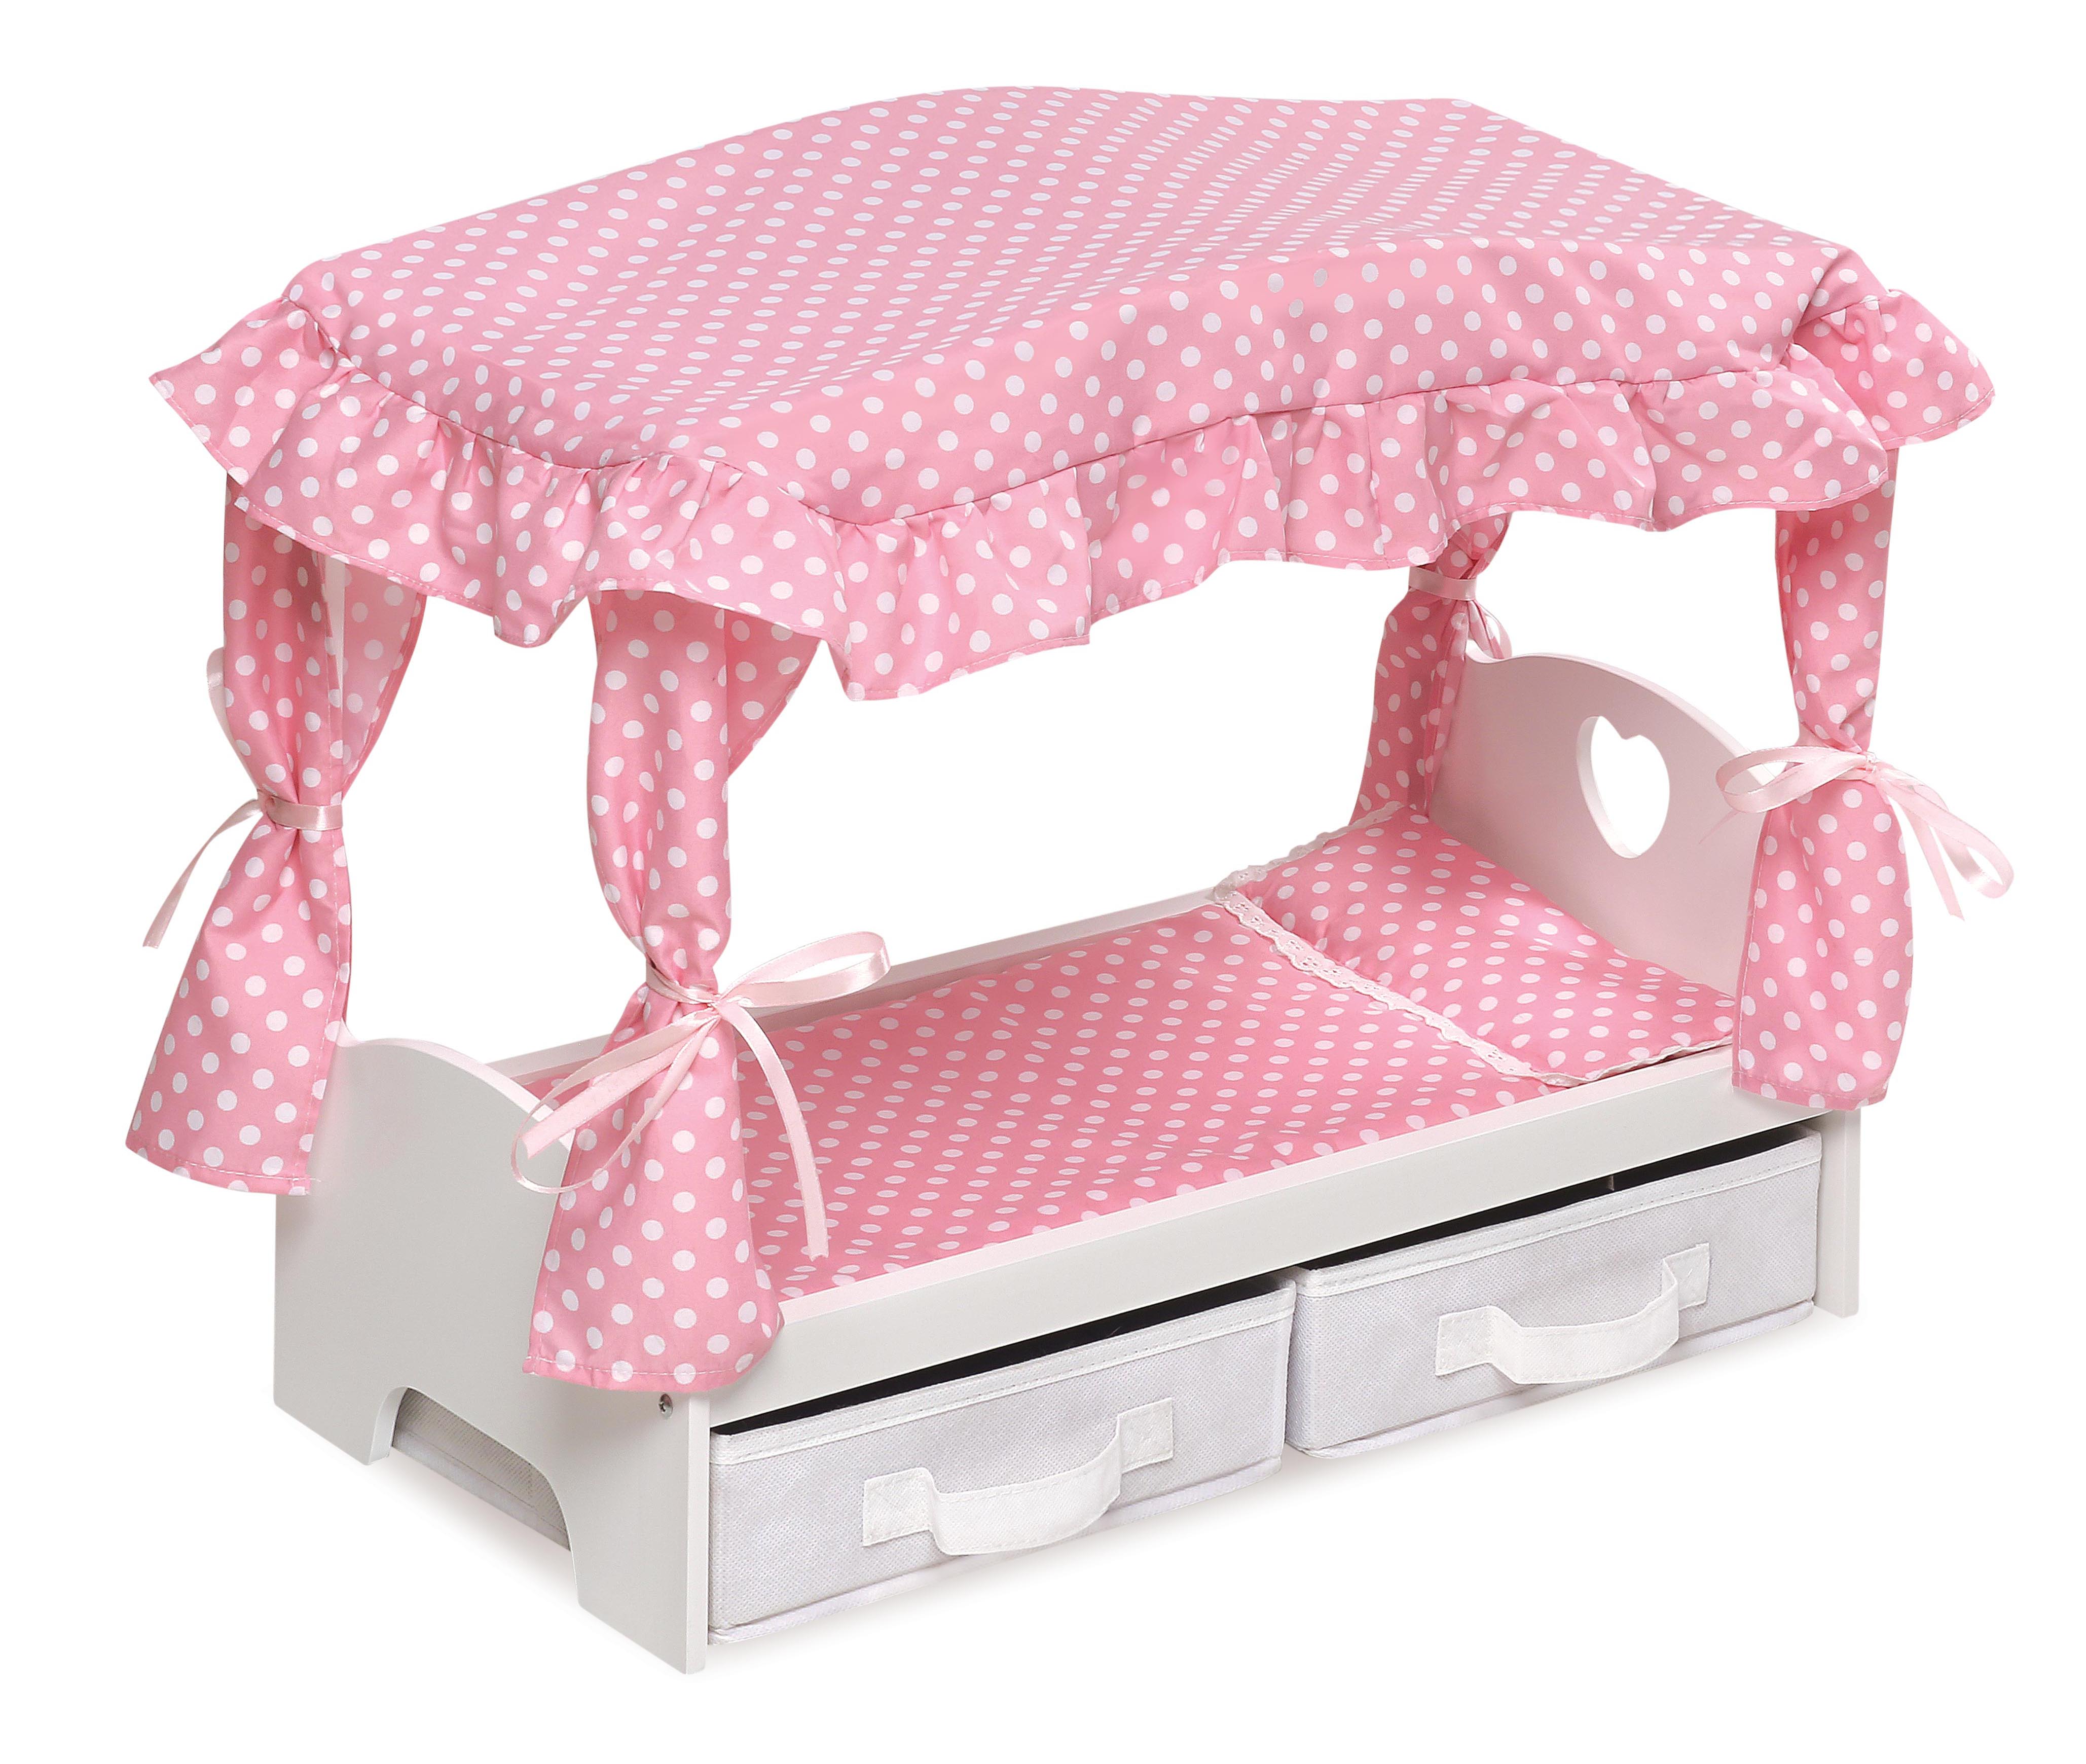 Canopy Doll Bed with Two Storage Baskets - Pink/Polka Dot